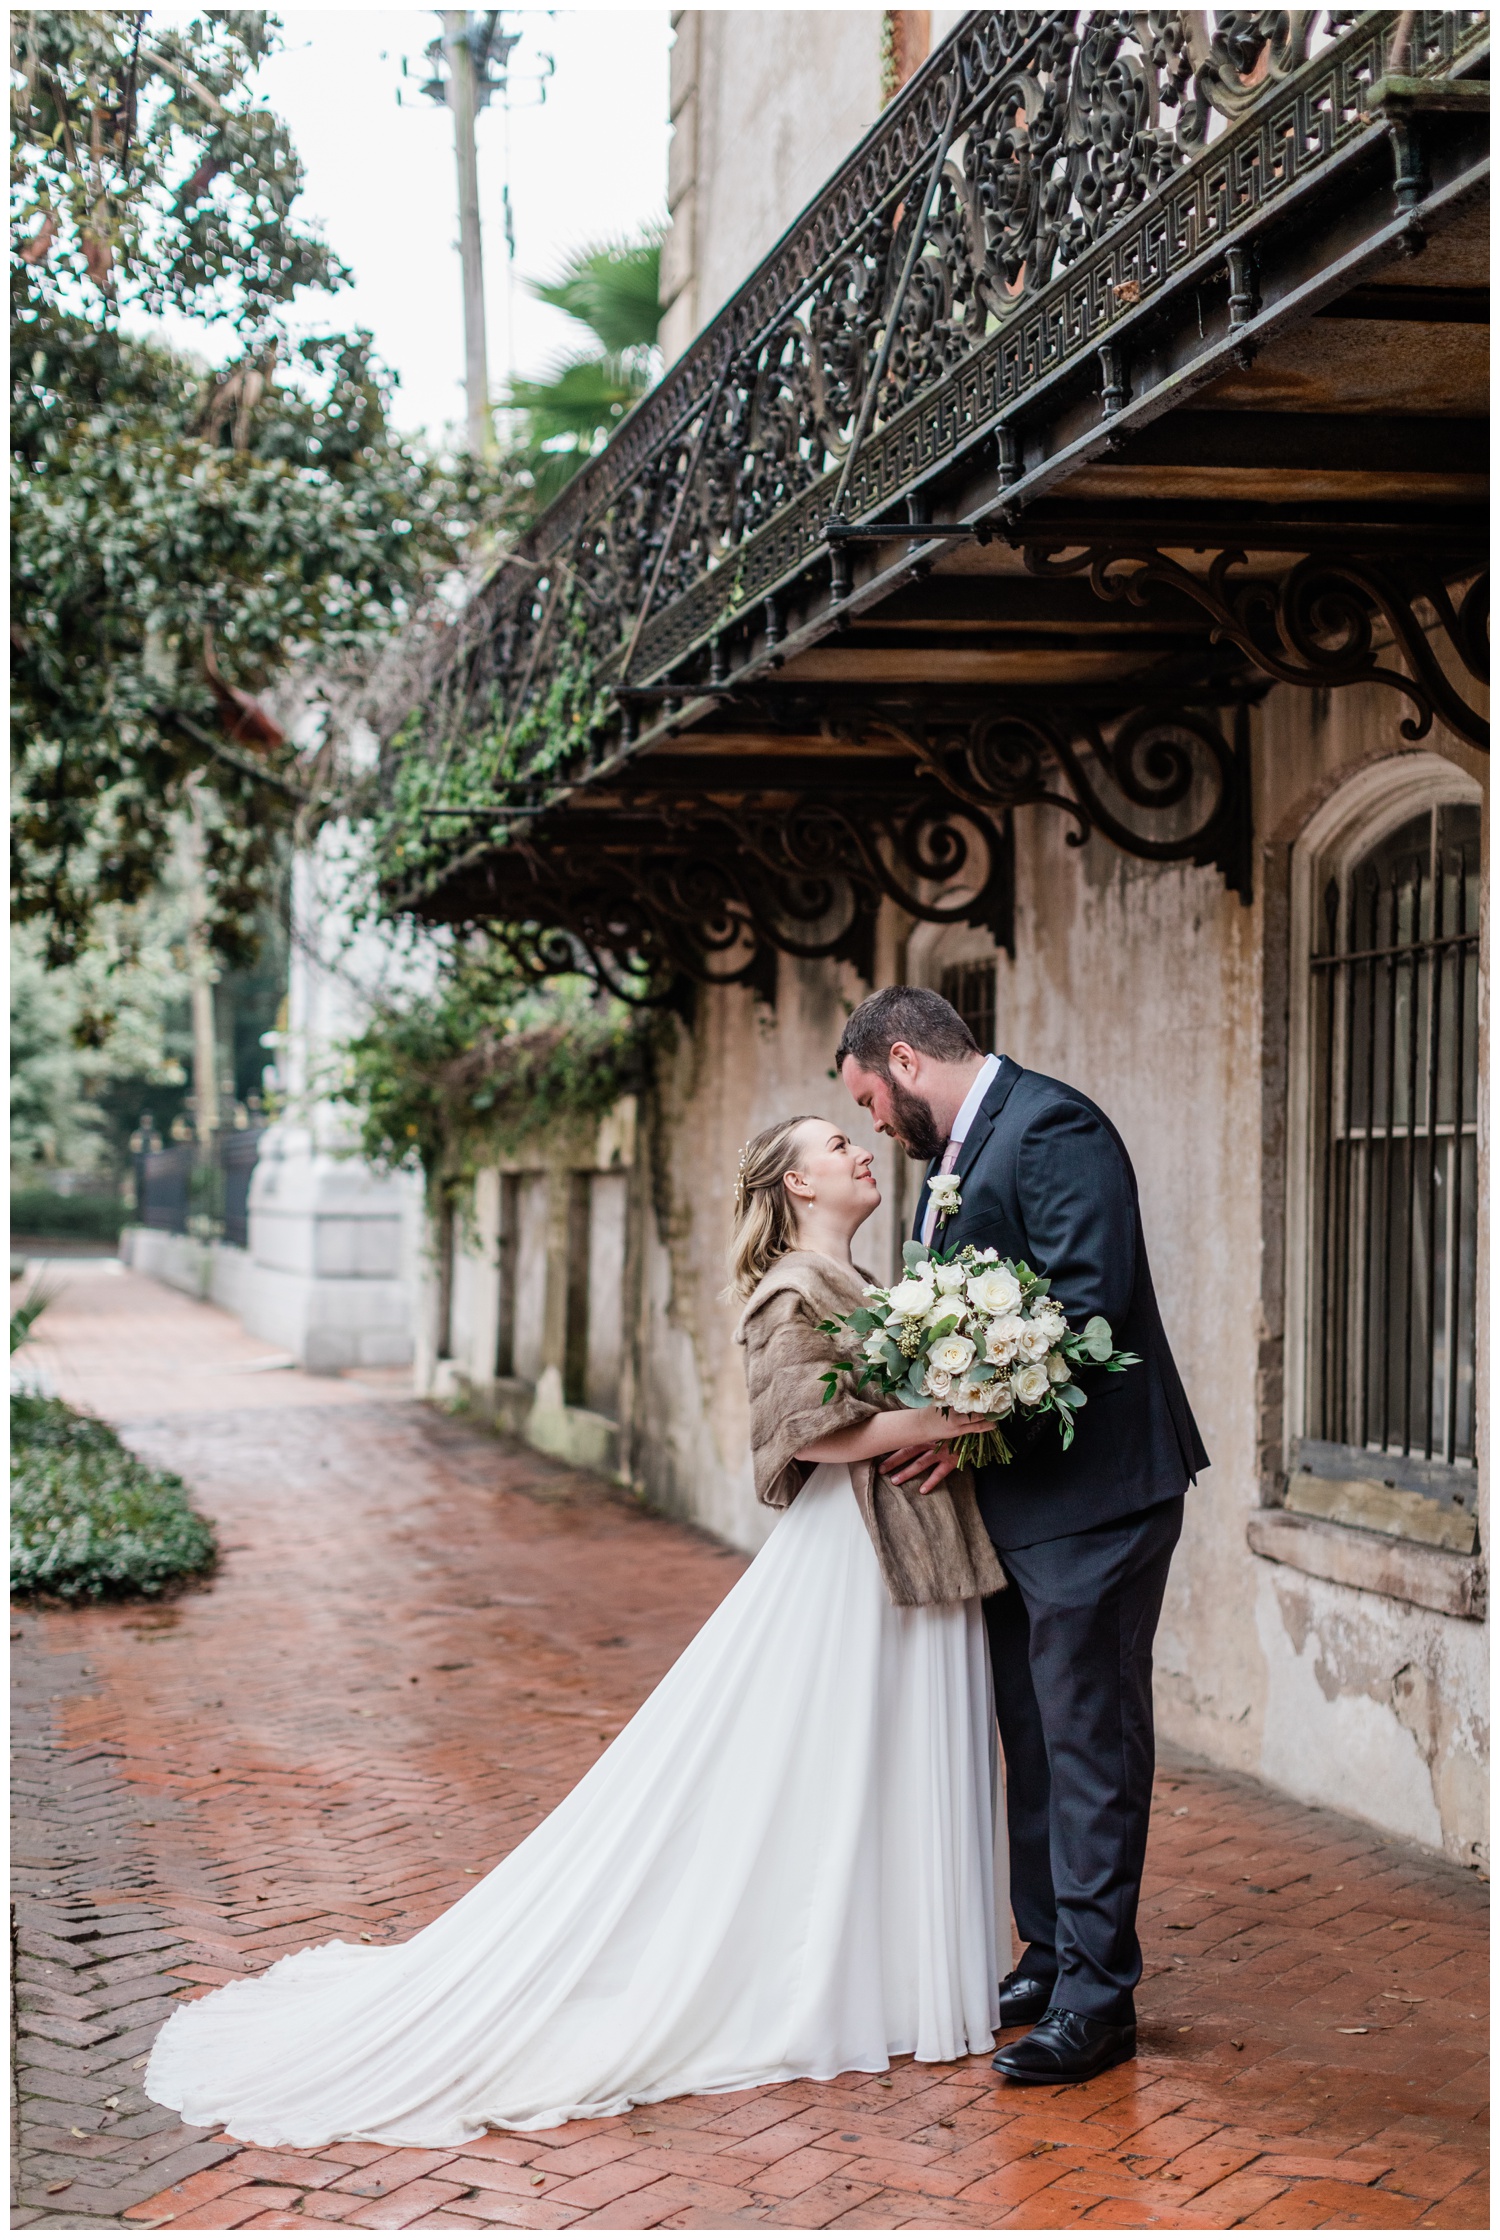 keeping warm during couples portraits - the savannah elopement package